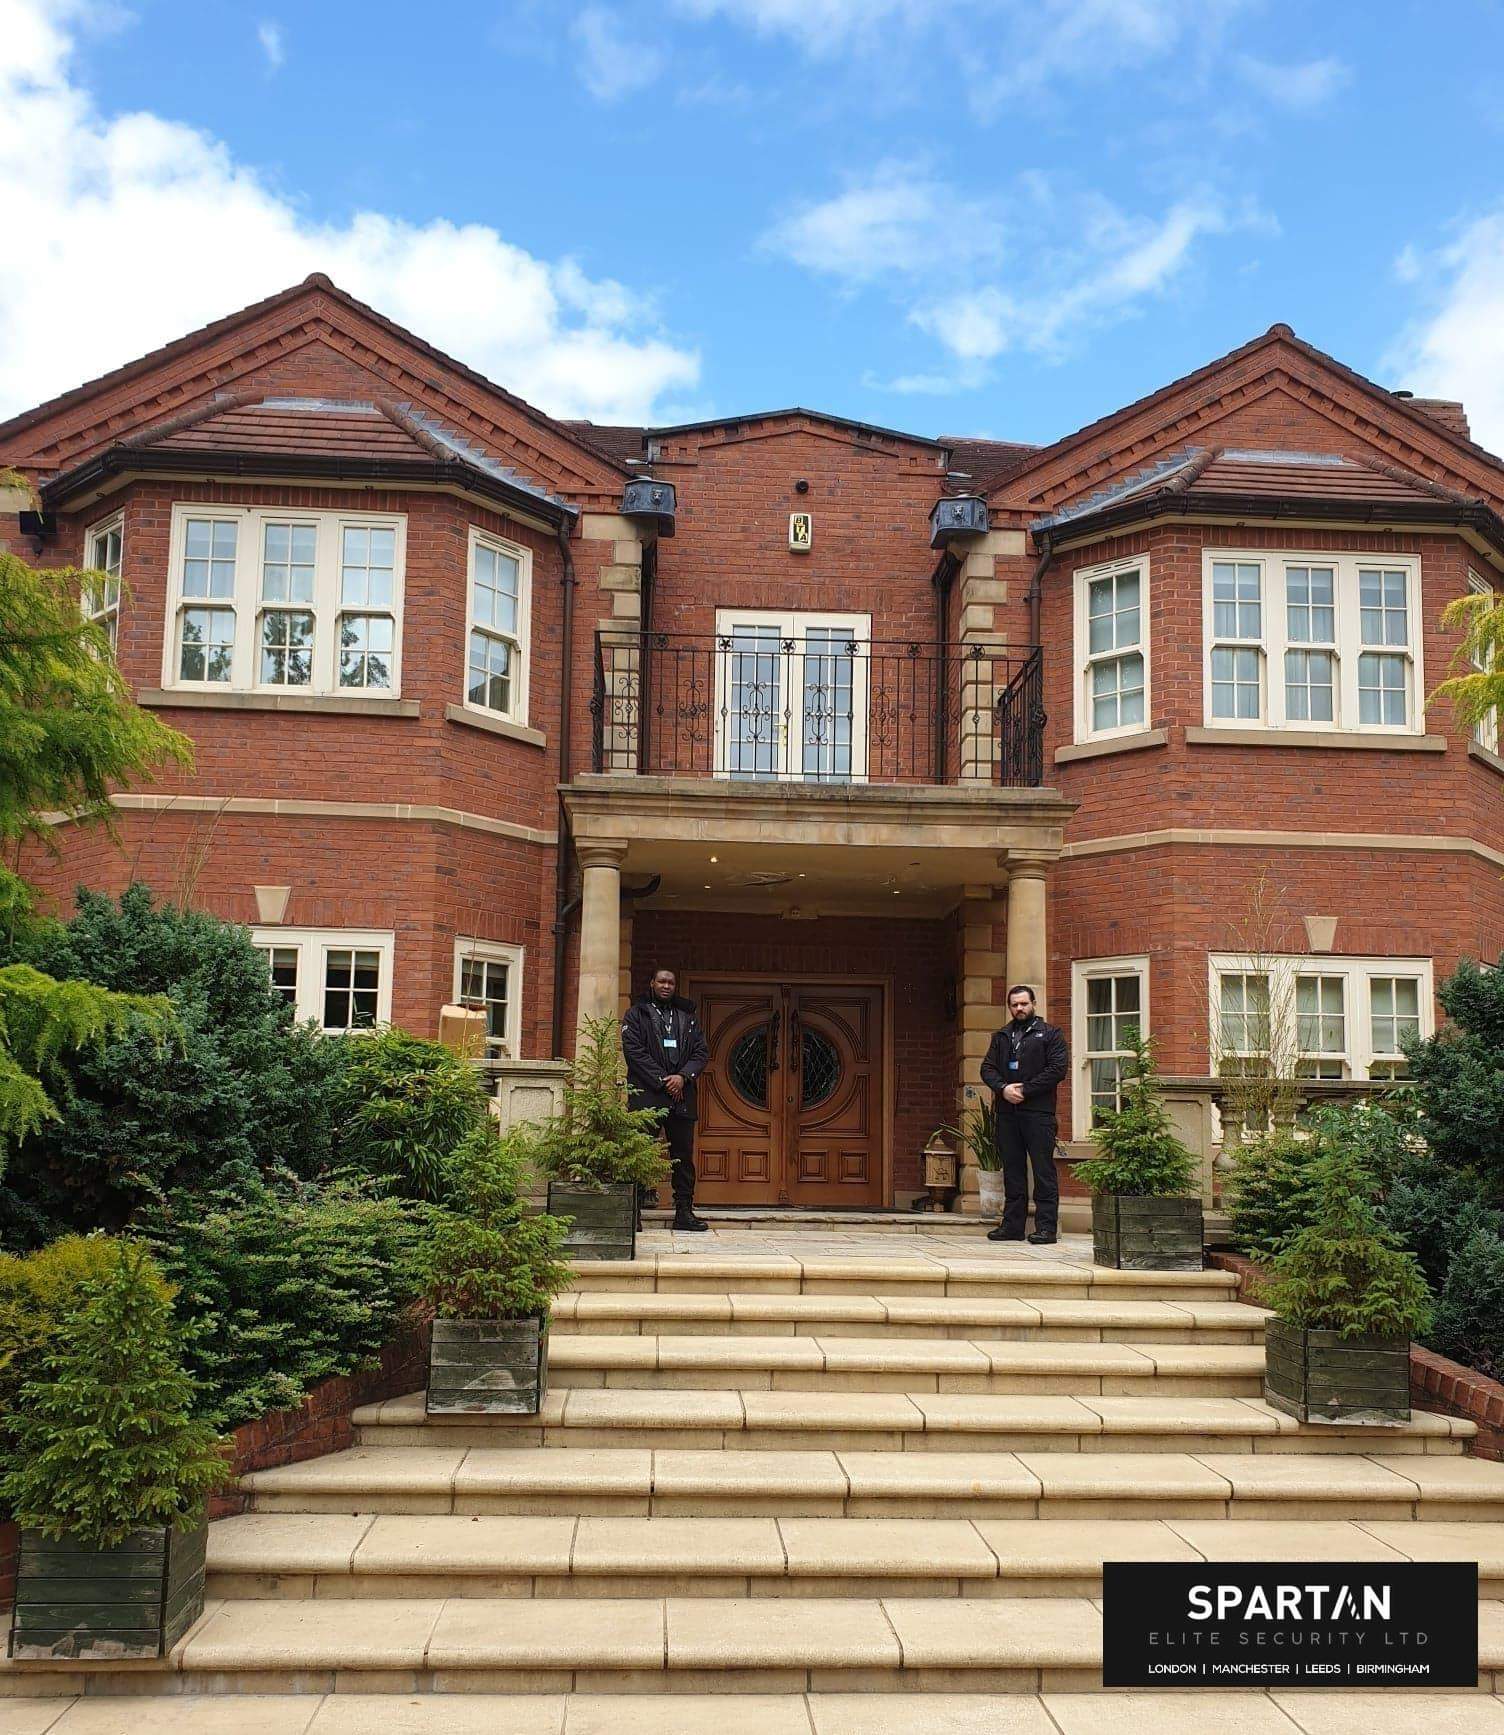 Residential security and protection services in London